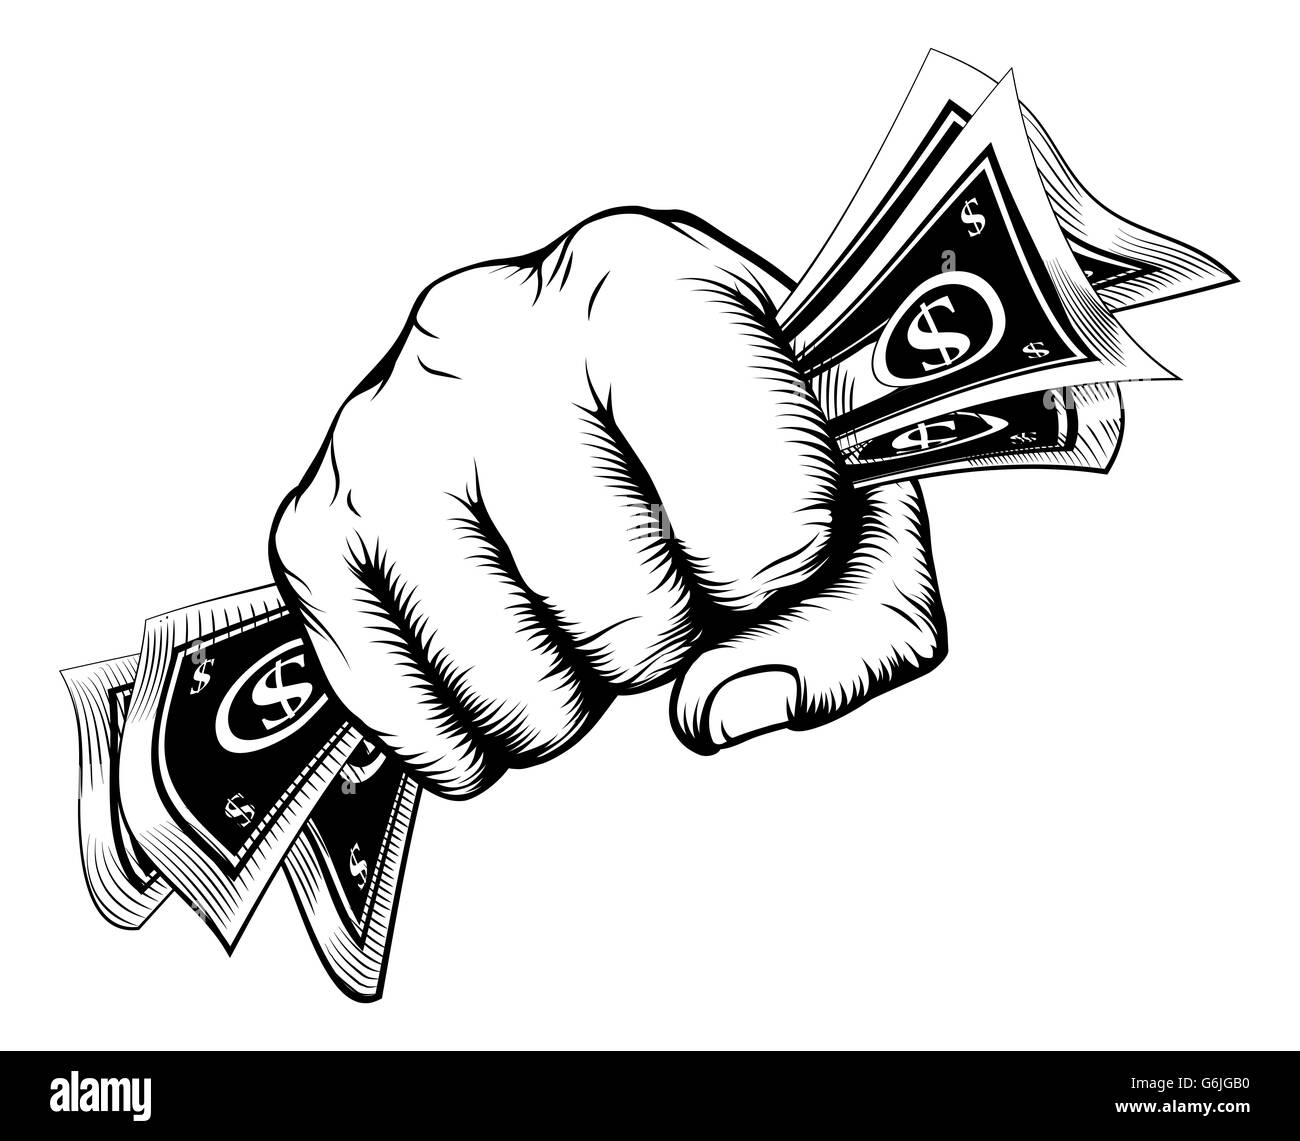 A fist holding cash money dollar bills in a vintage woodcut style Stock Photo